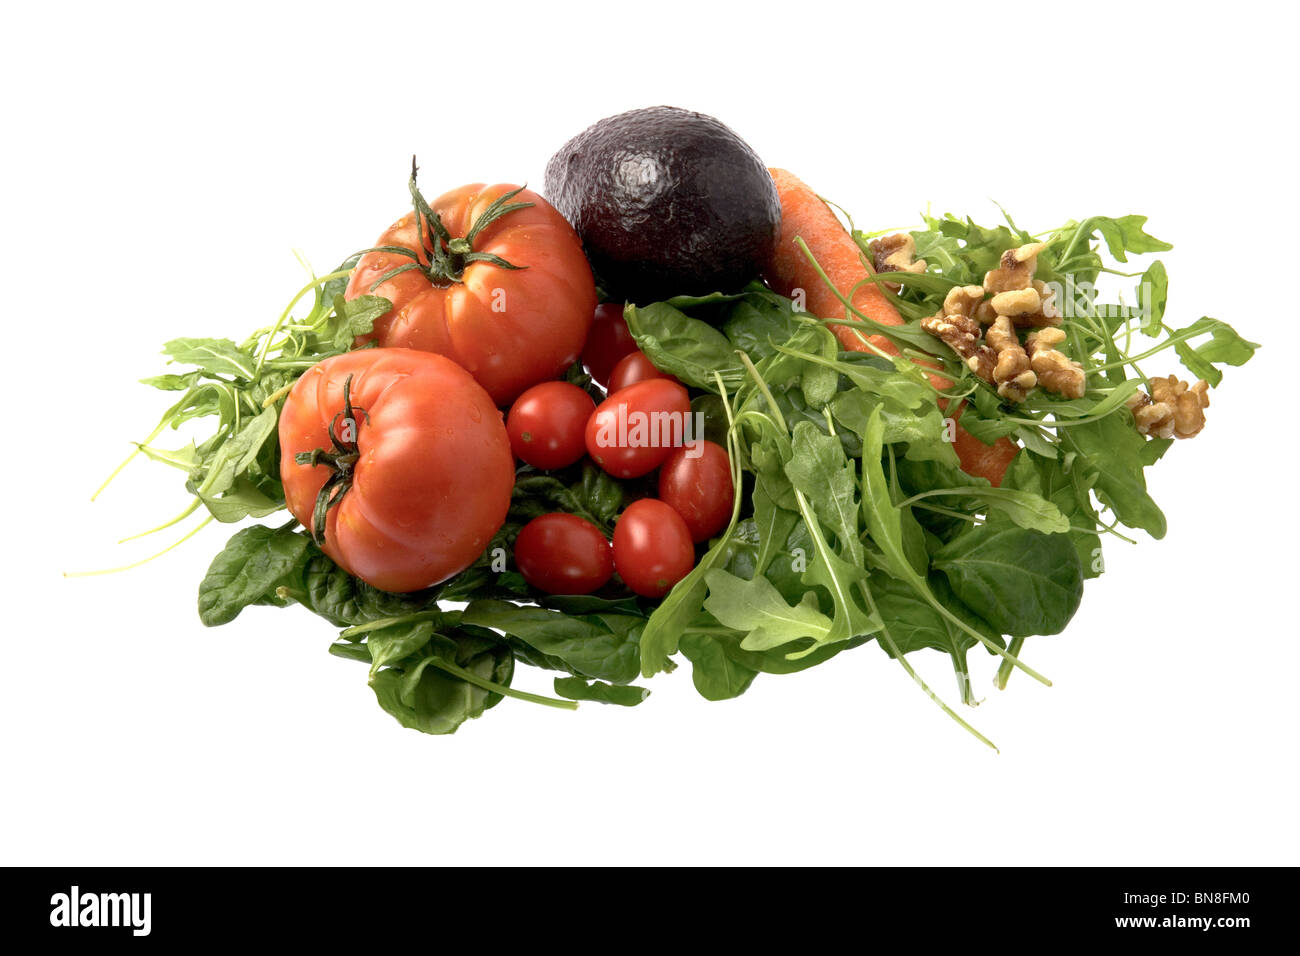 Fresh salad ingredients isolated against a white background. Stock Photo